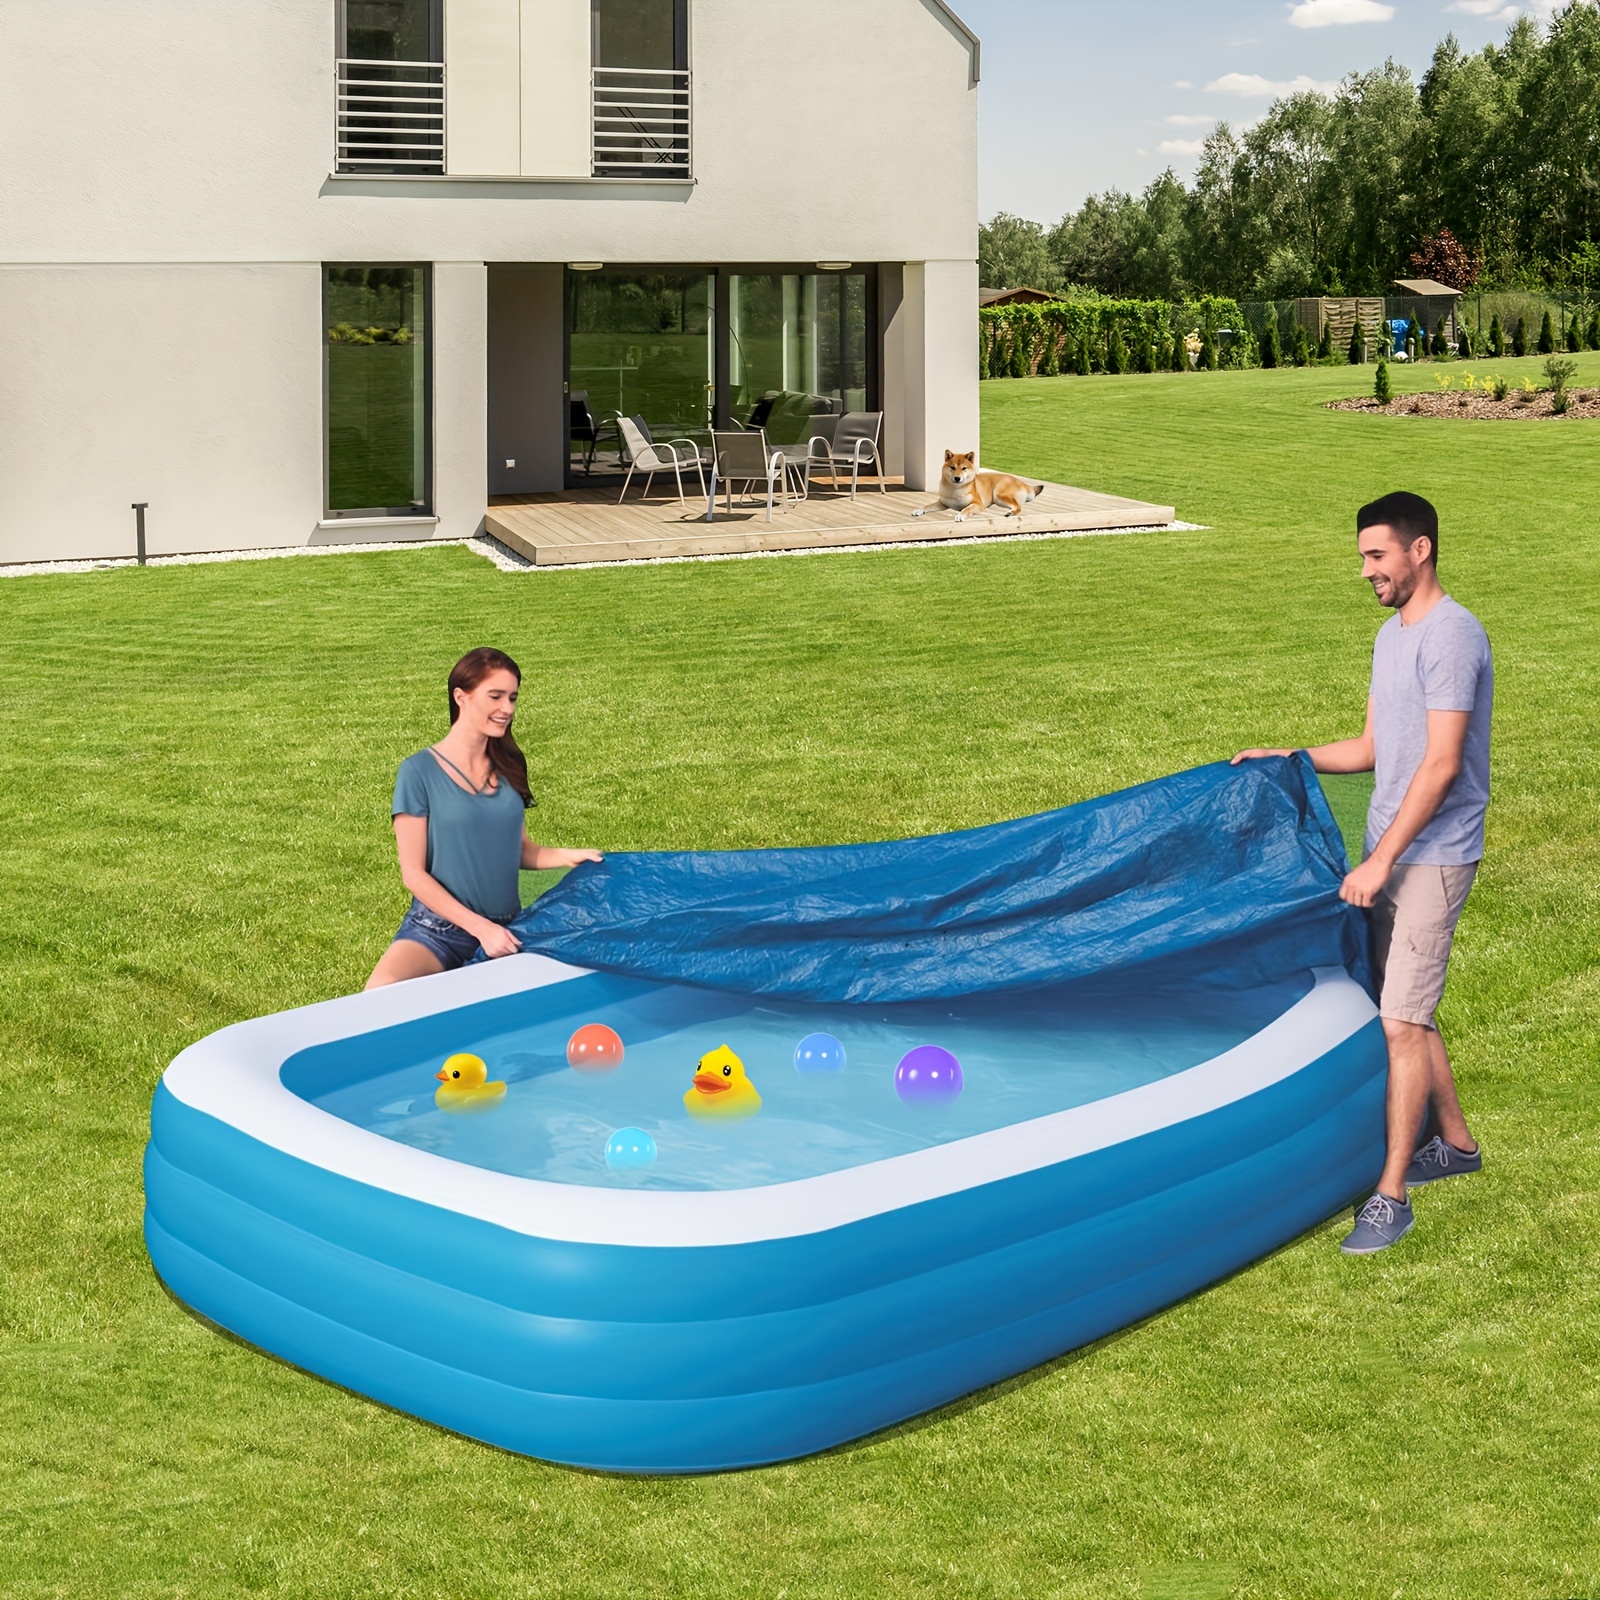 

Heavy-duty Blue Square Inflatable Pool Cover - Waterproof, Dustproof With Elastic Edges For Above Ground Pools